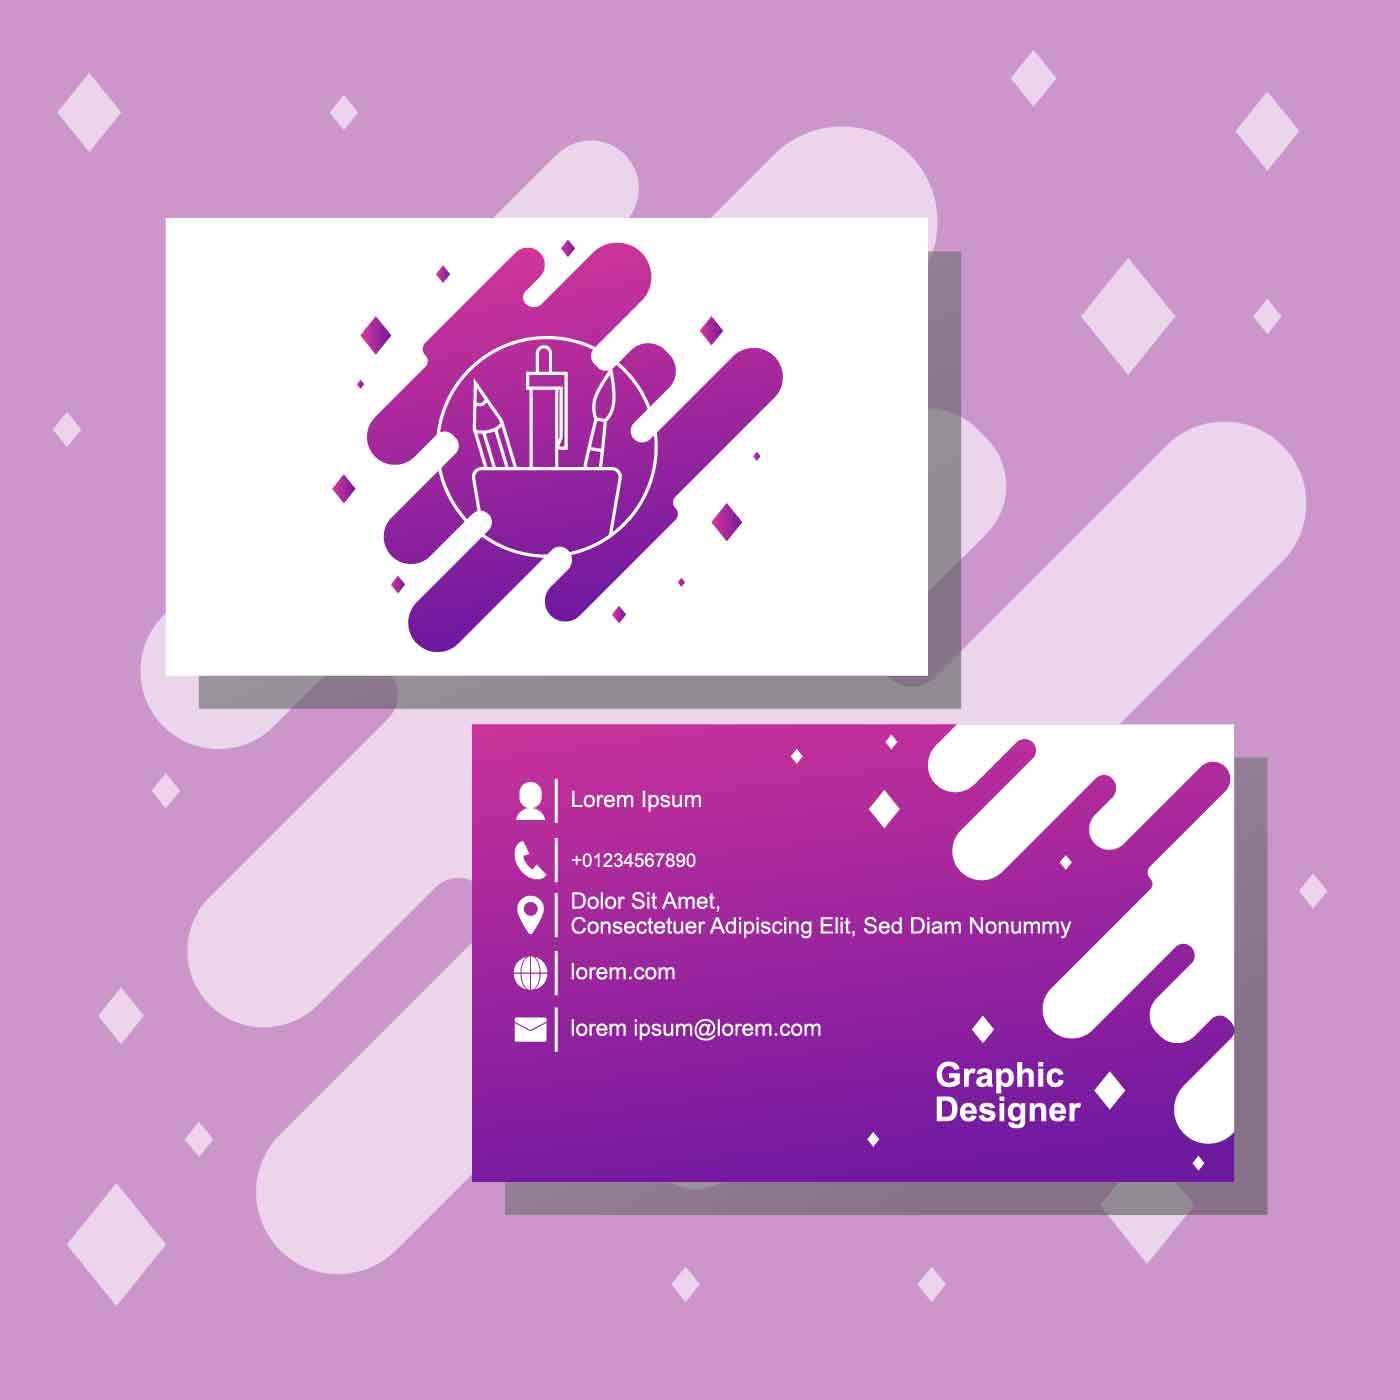 Graphic Designer Business Cards / Free Simple Graphic Designer Business